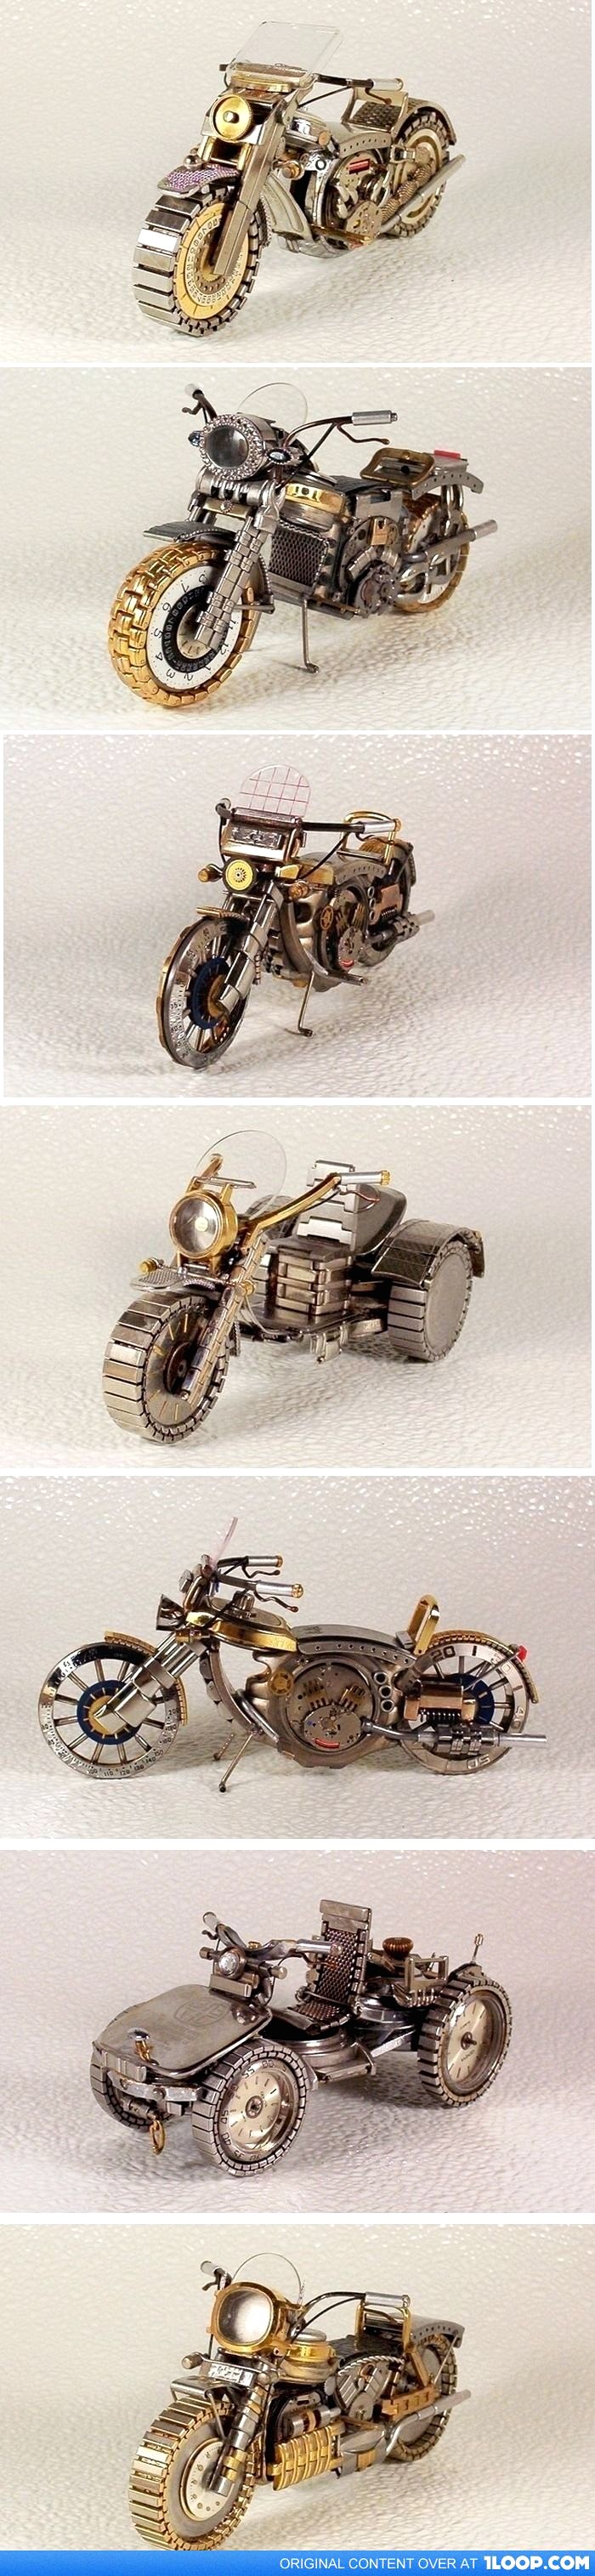 Made from watches